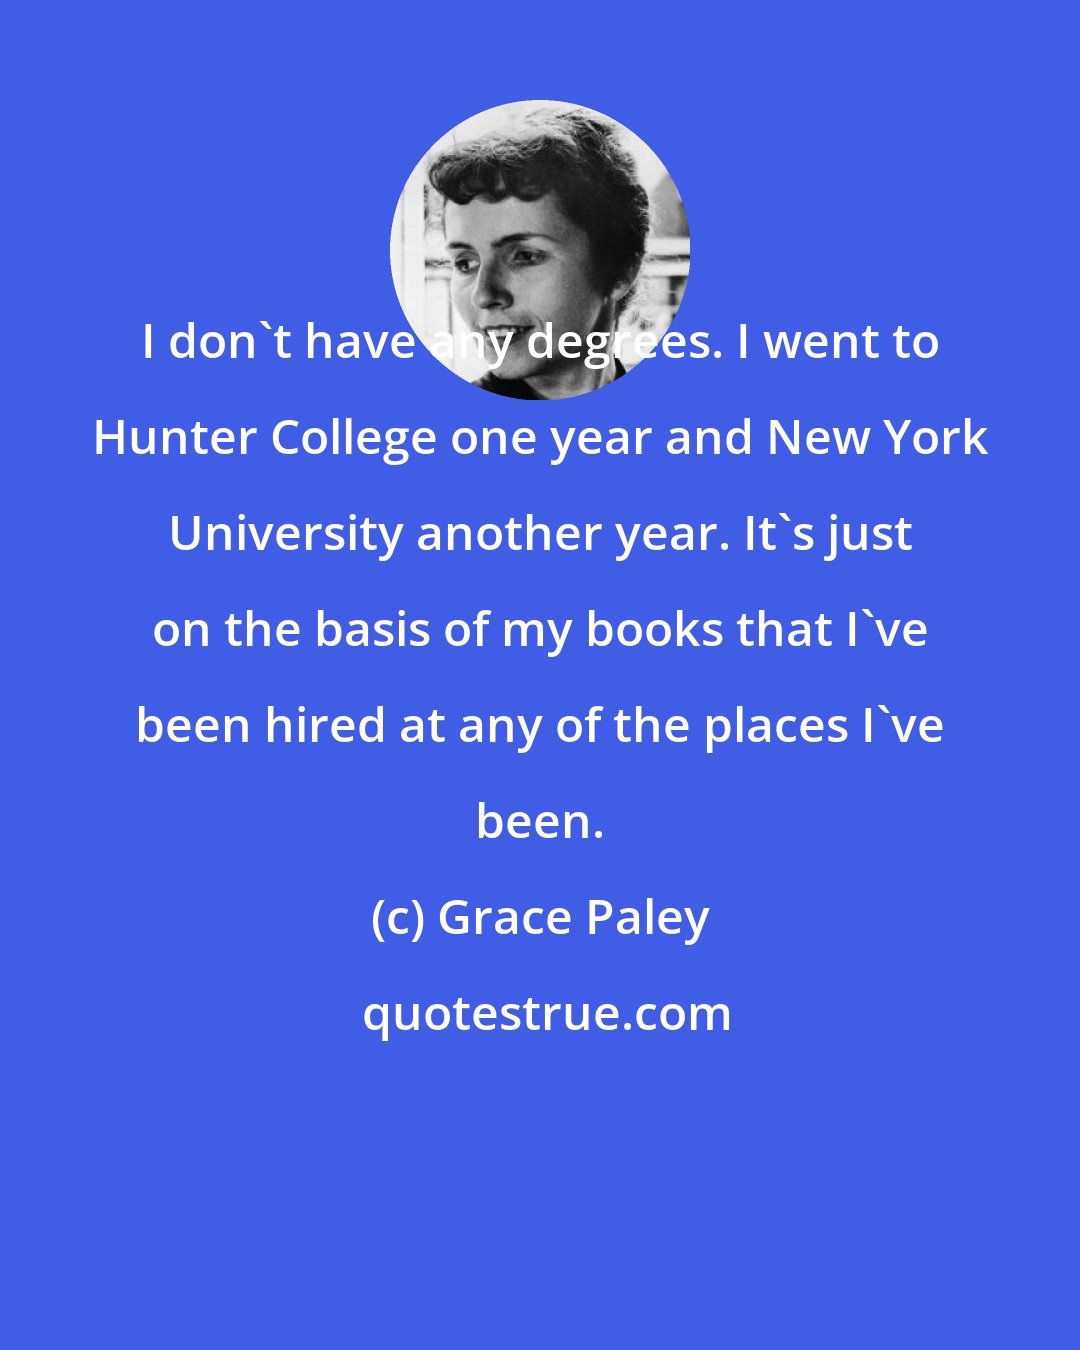 Grace Paley: I don't have any degrees. I went to Hunter College one year and New York University another year. It's just on the basis of my books that I've been hired at any of the places I've been.